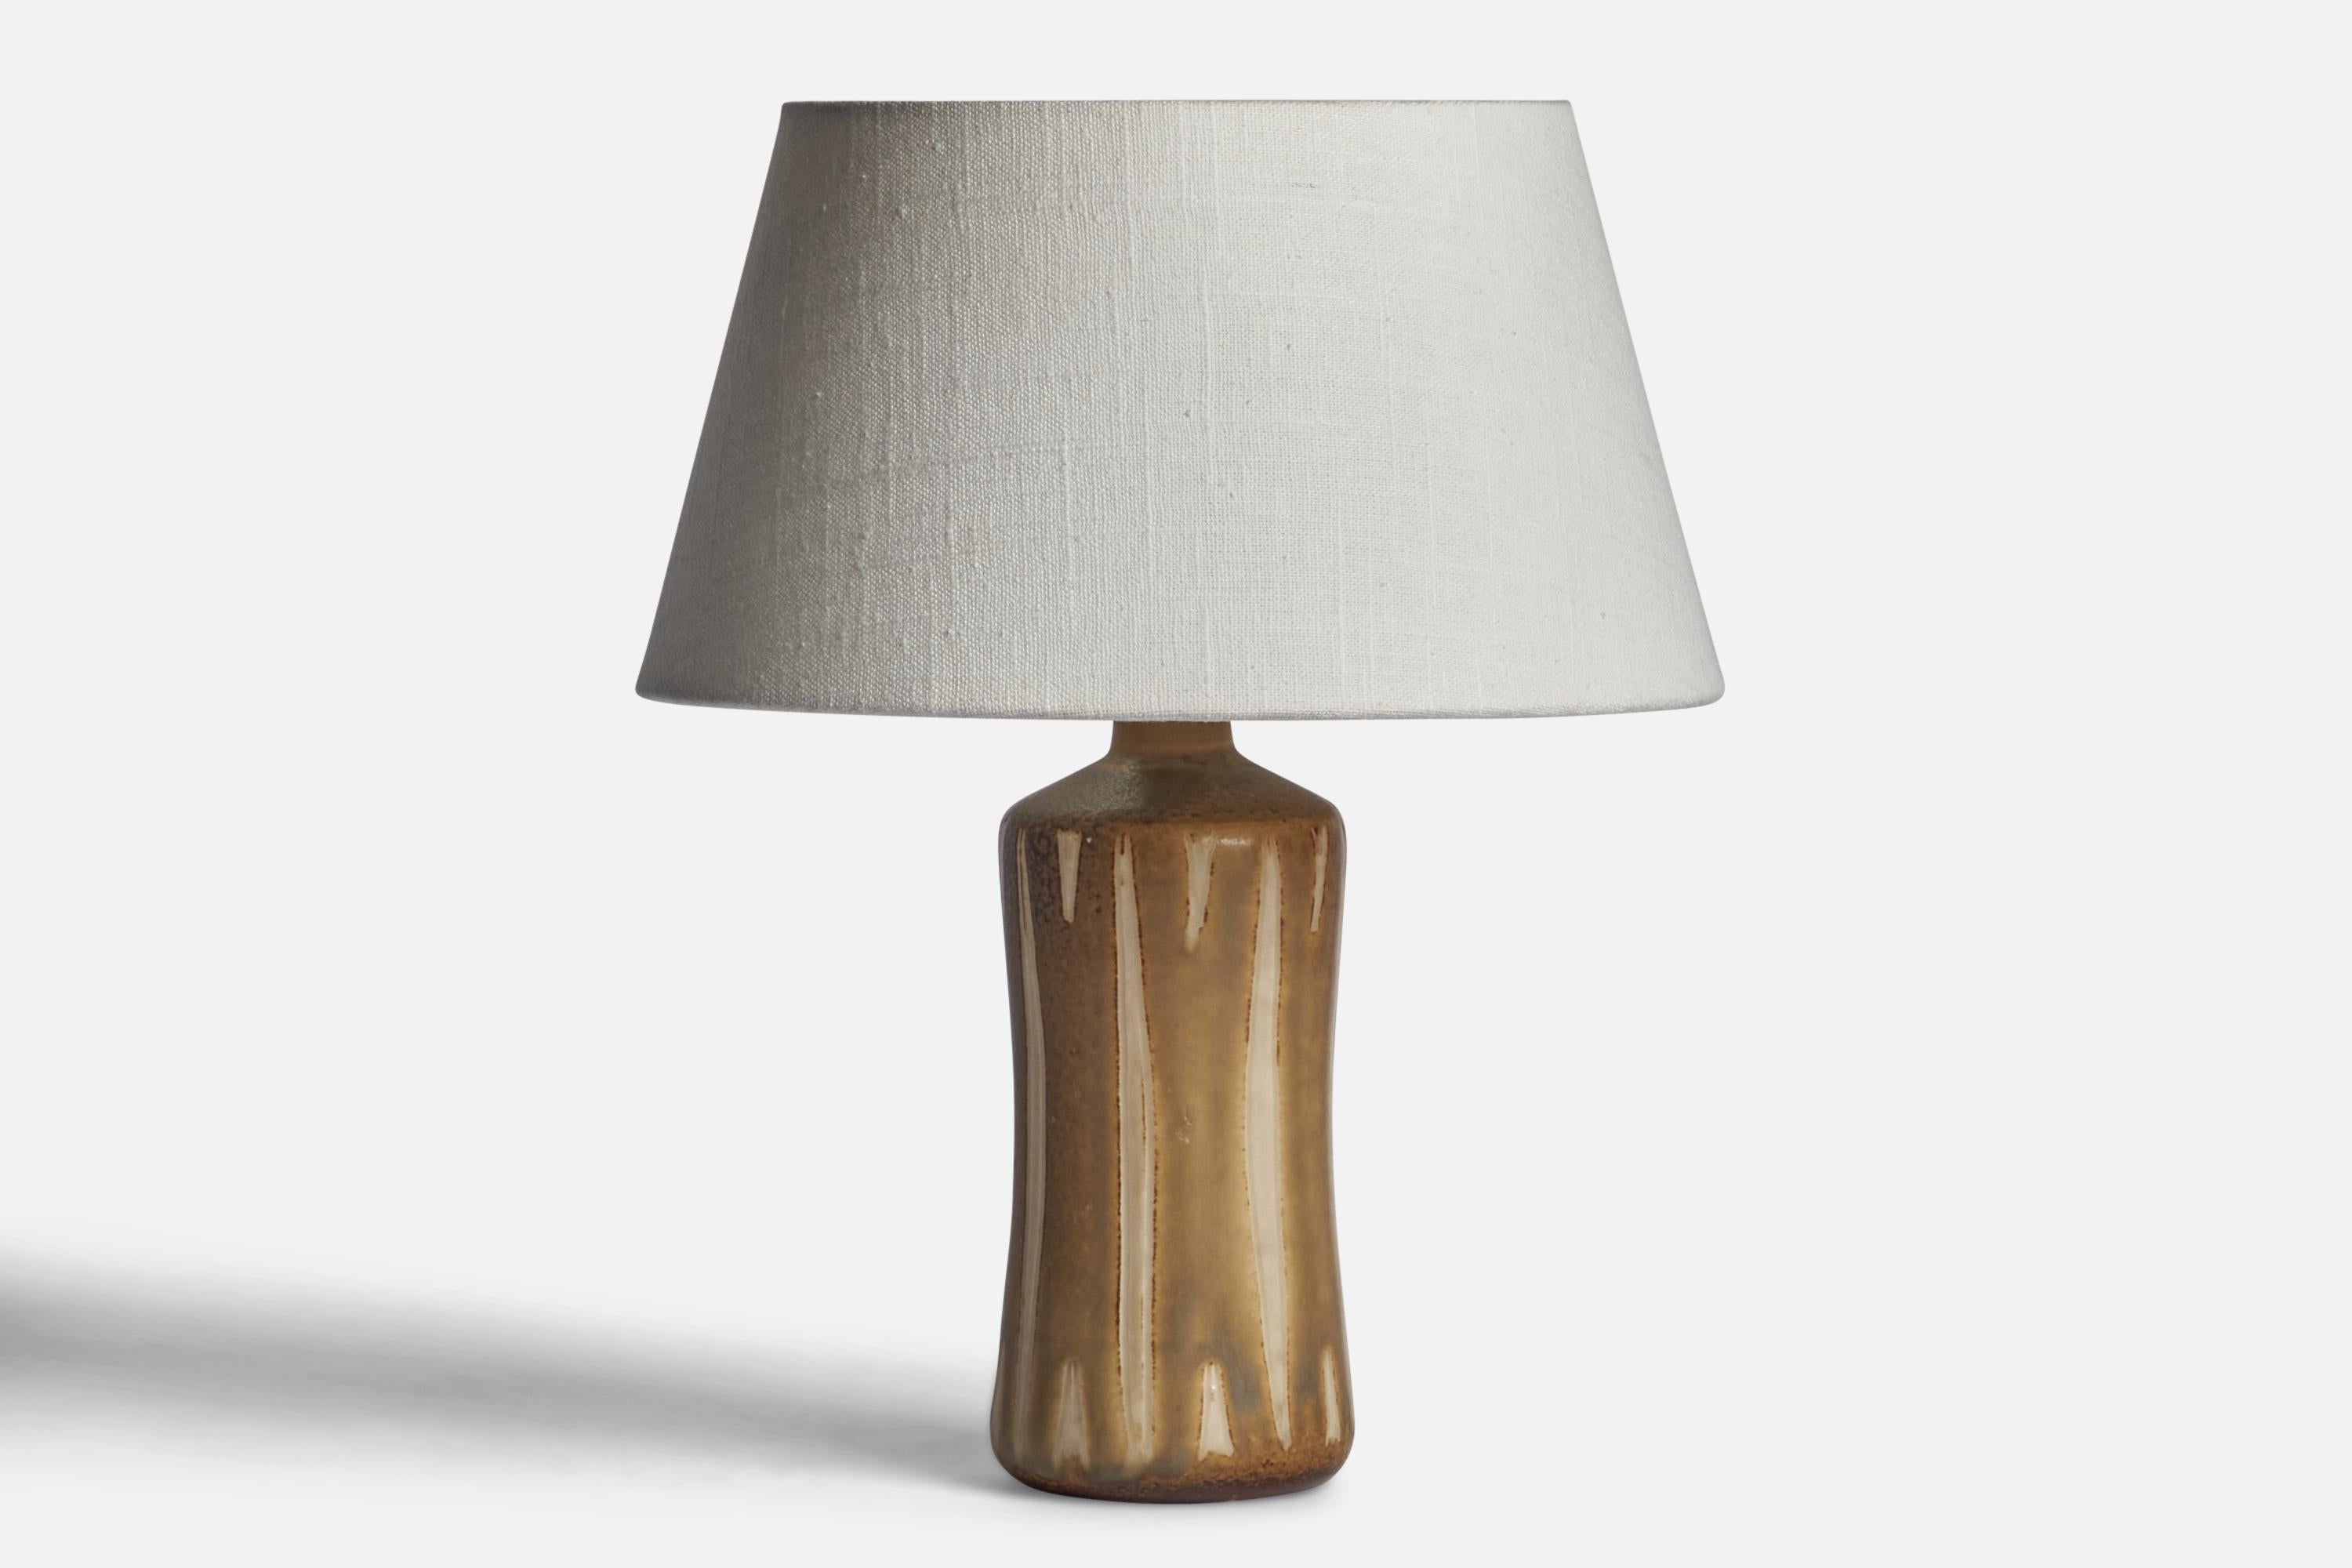 A brown and beige-glazed stoneware table lamp designed and produced by Kähler, Denmark, c. 1960s.

Dimensions of Lamp (inches): 10.05” H x 3.25” Diameter
Dimensions of Shade (inches): 7” Top Diameter x 10” Bottom Diameter x 5.5” H 
Dimensions of